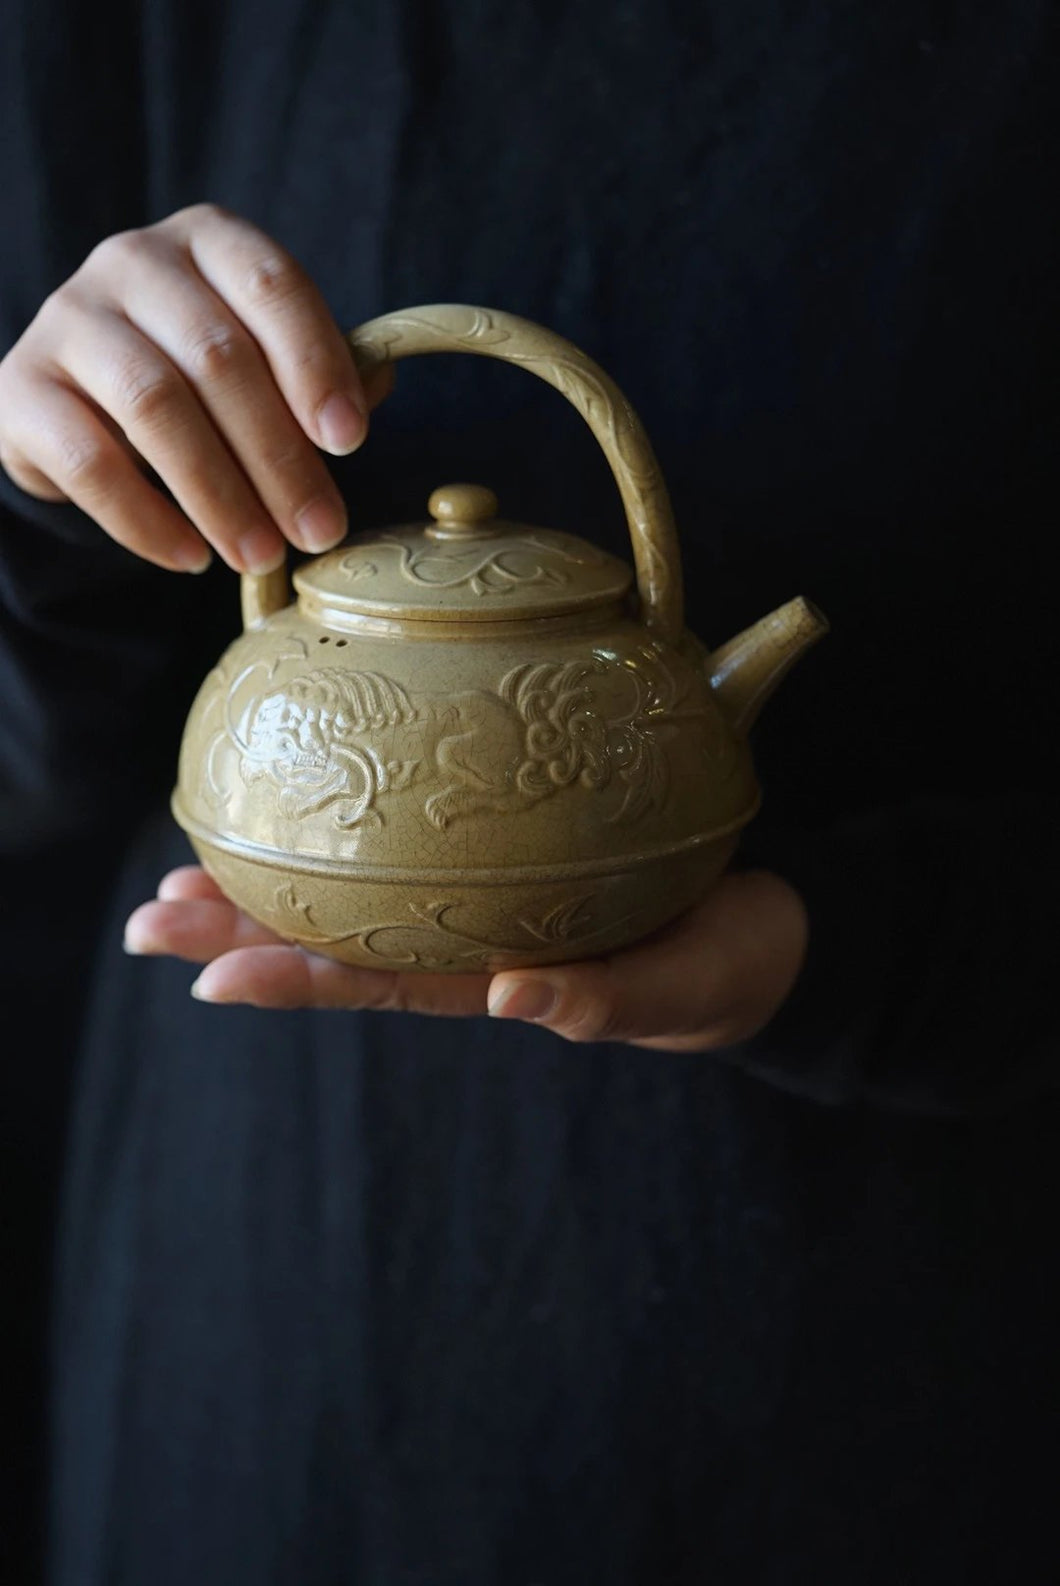 Shuangshi Song Huang Tiliang Pot Carved with Shuangshi Tea Cultivation Slices About 650ml Carbon Stove Electric Pottery Stove Open flames are available